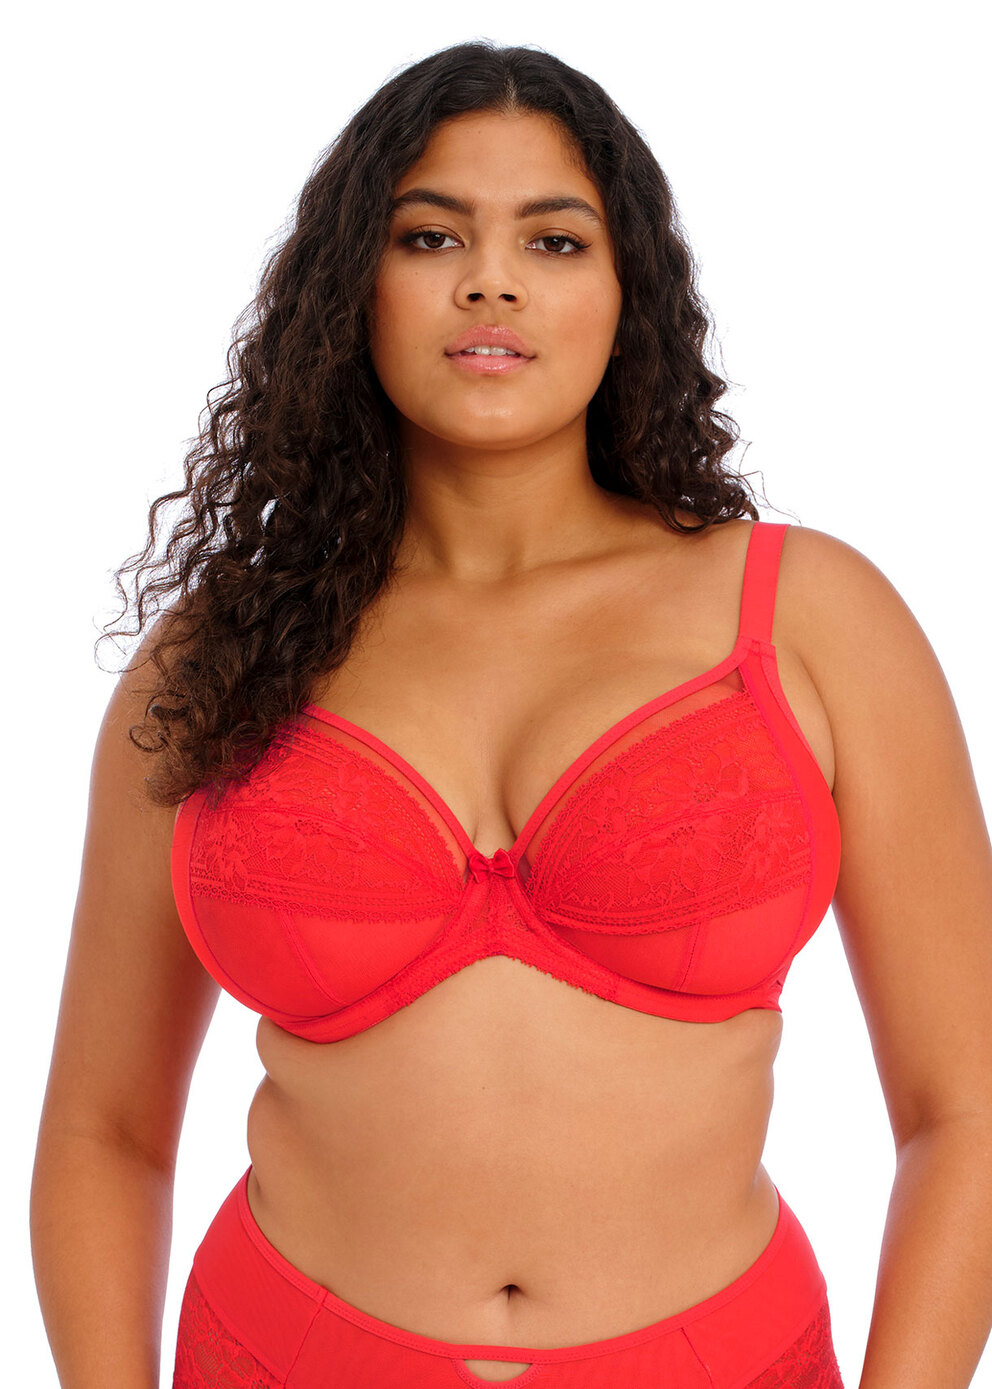 We Are We Wear Curve mesh sheer triangle bralette in red / orange - RED